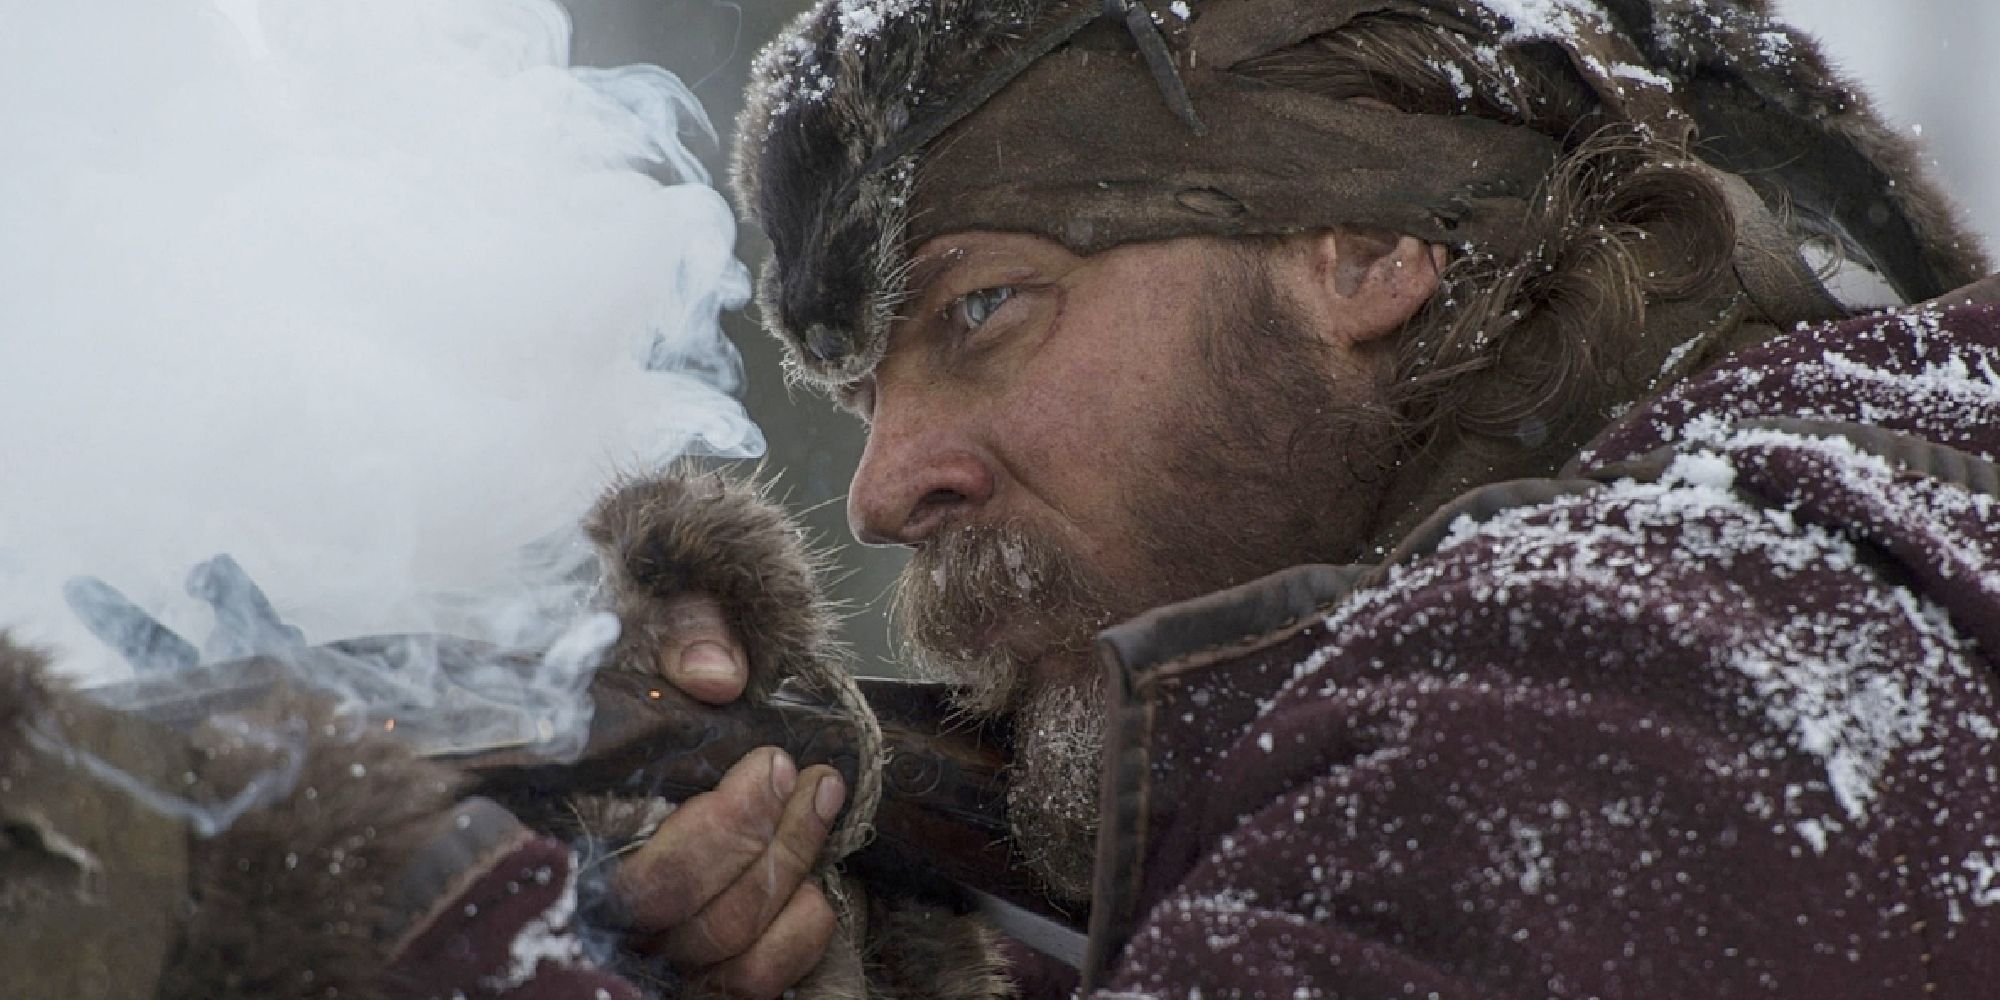 Tom Hardy as John Fitzgerald holding up a rifle  in 'The Revenant'